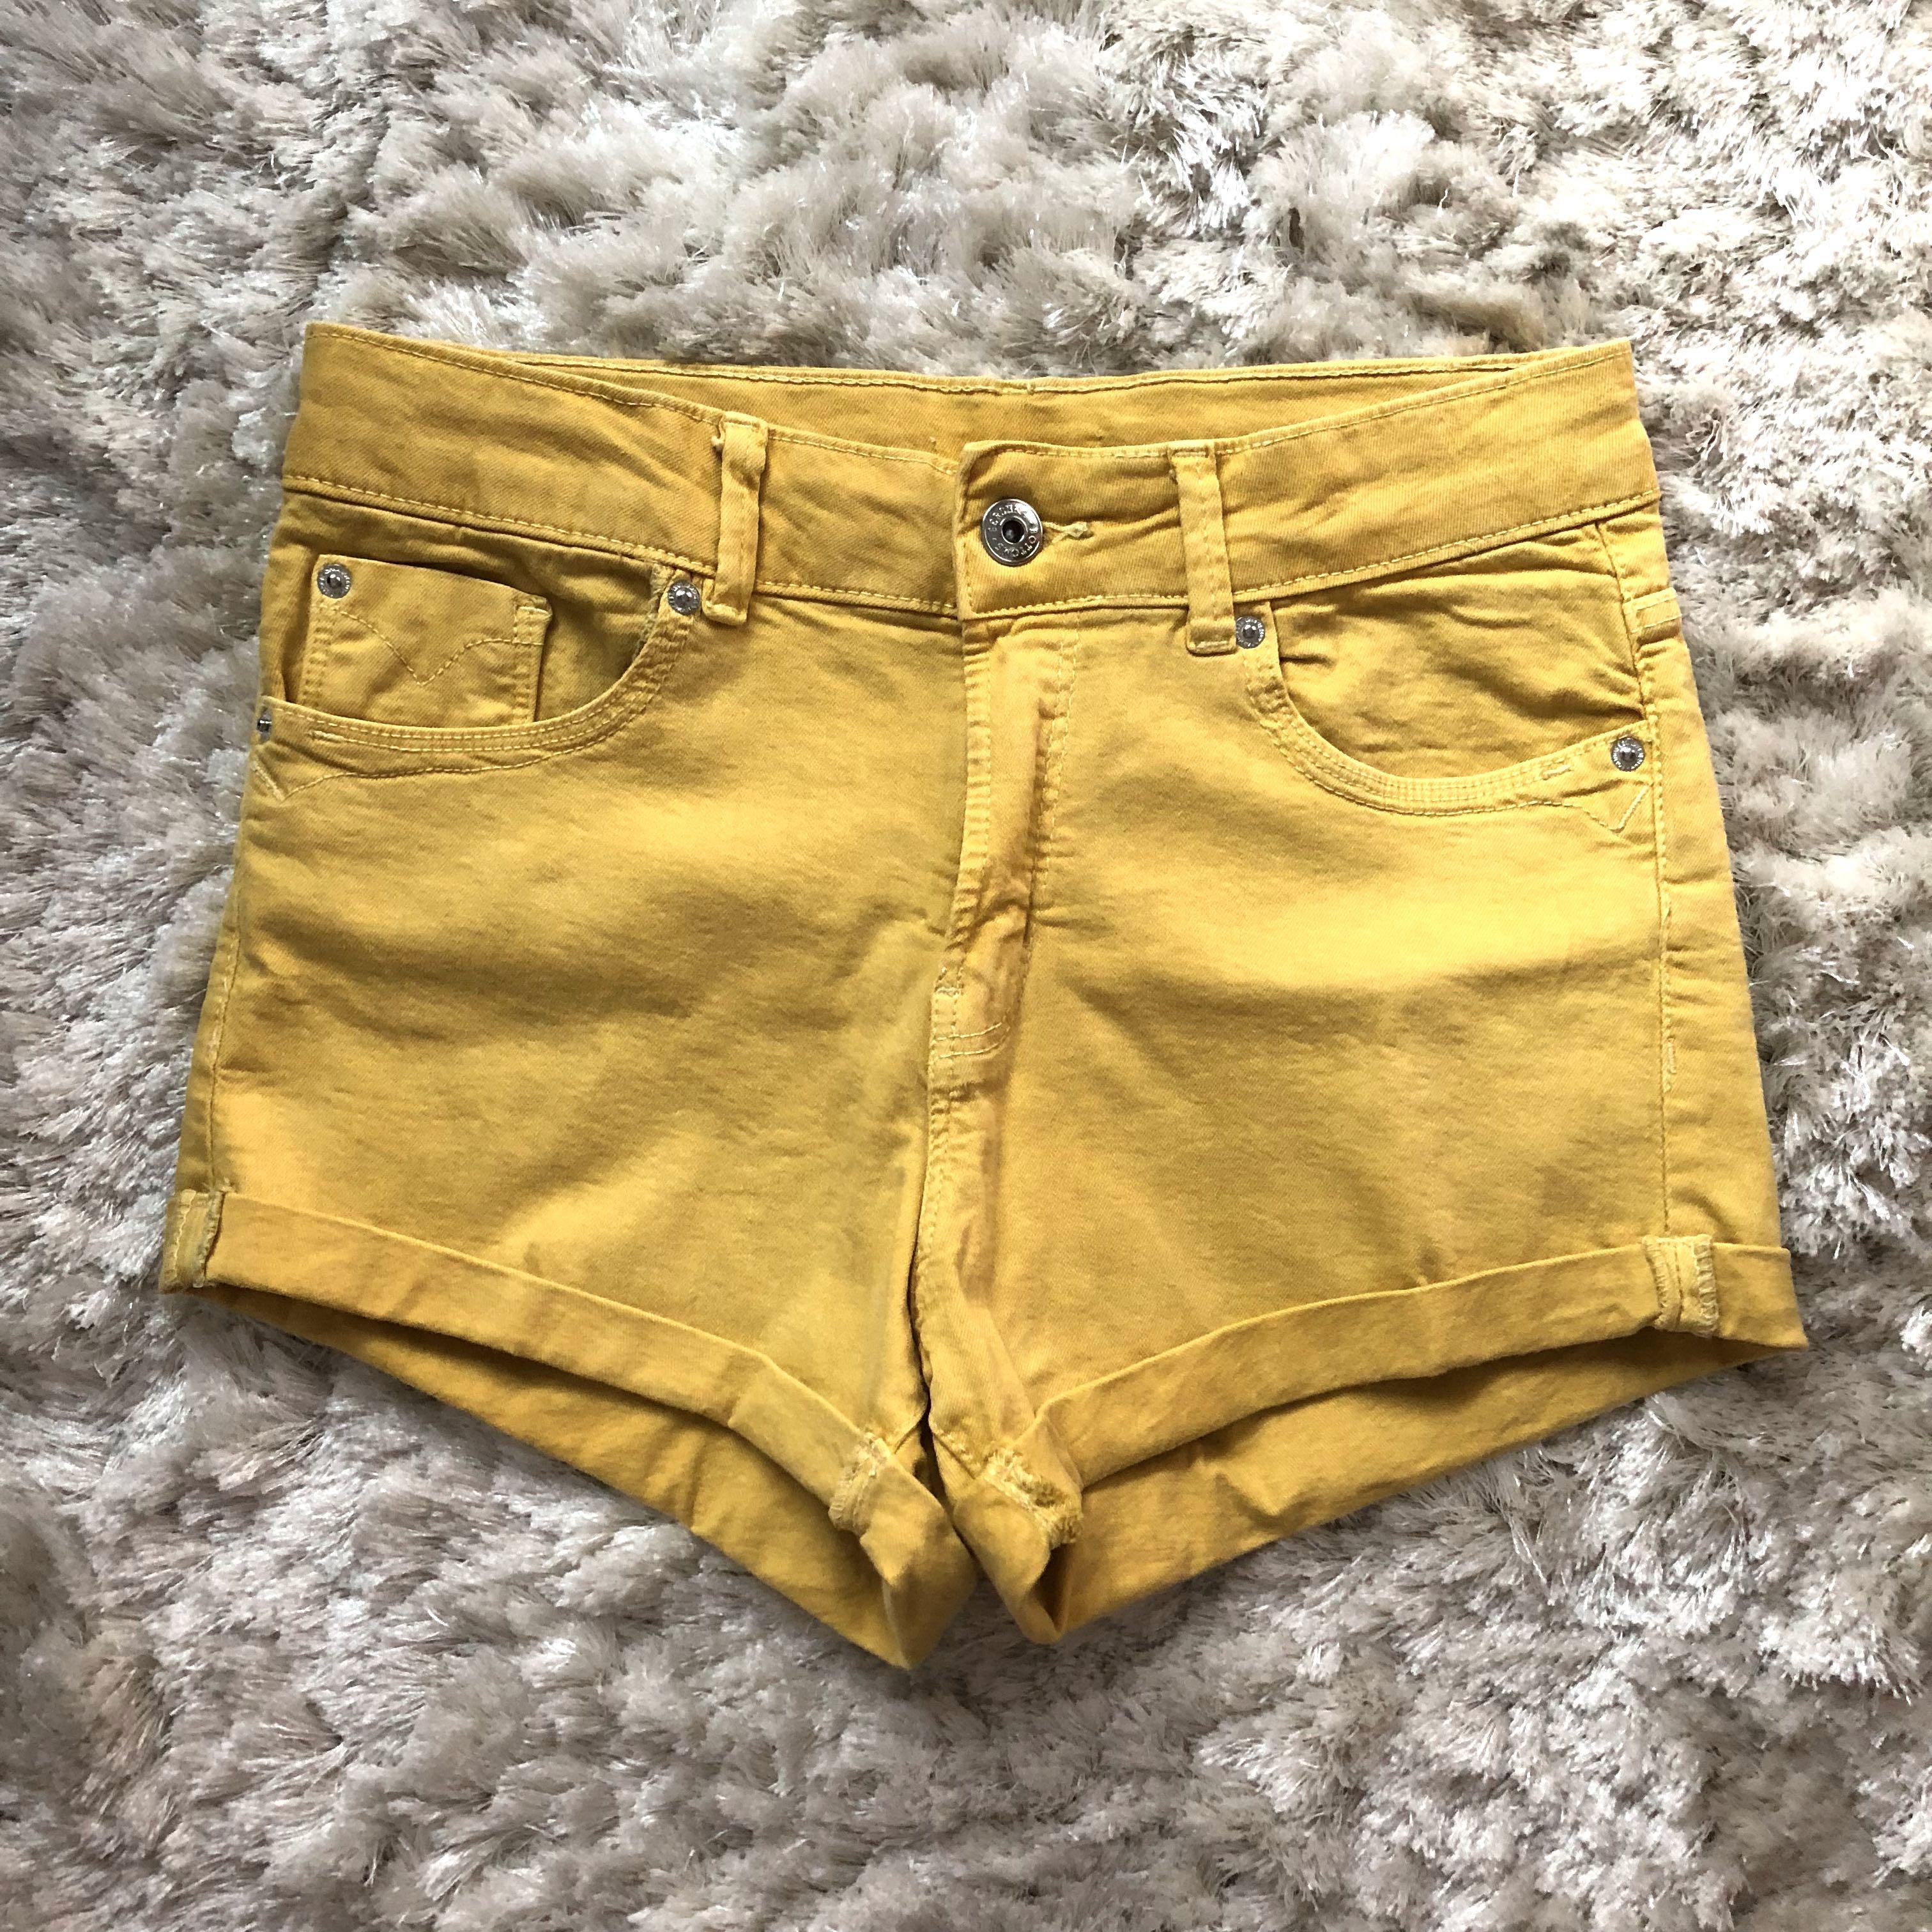 yellow jeans shorts